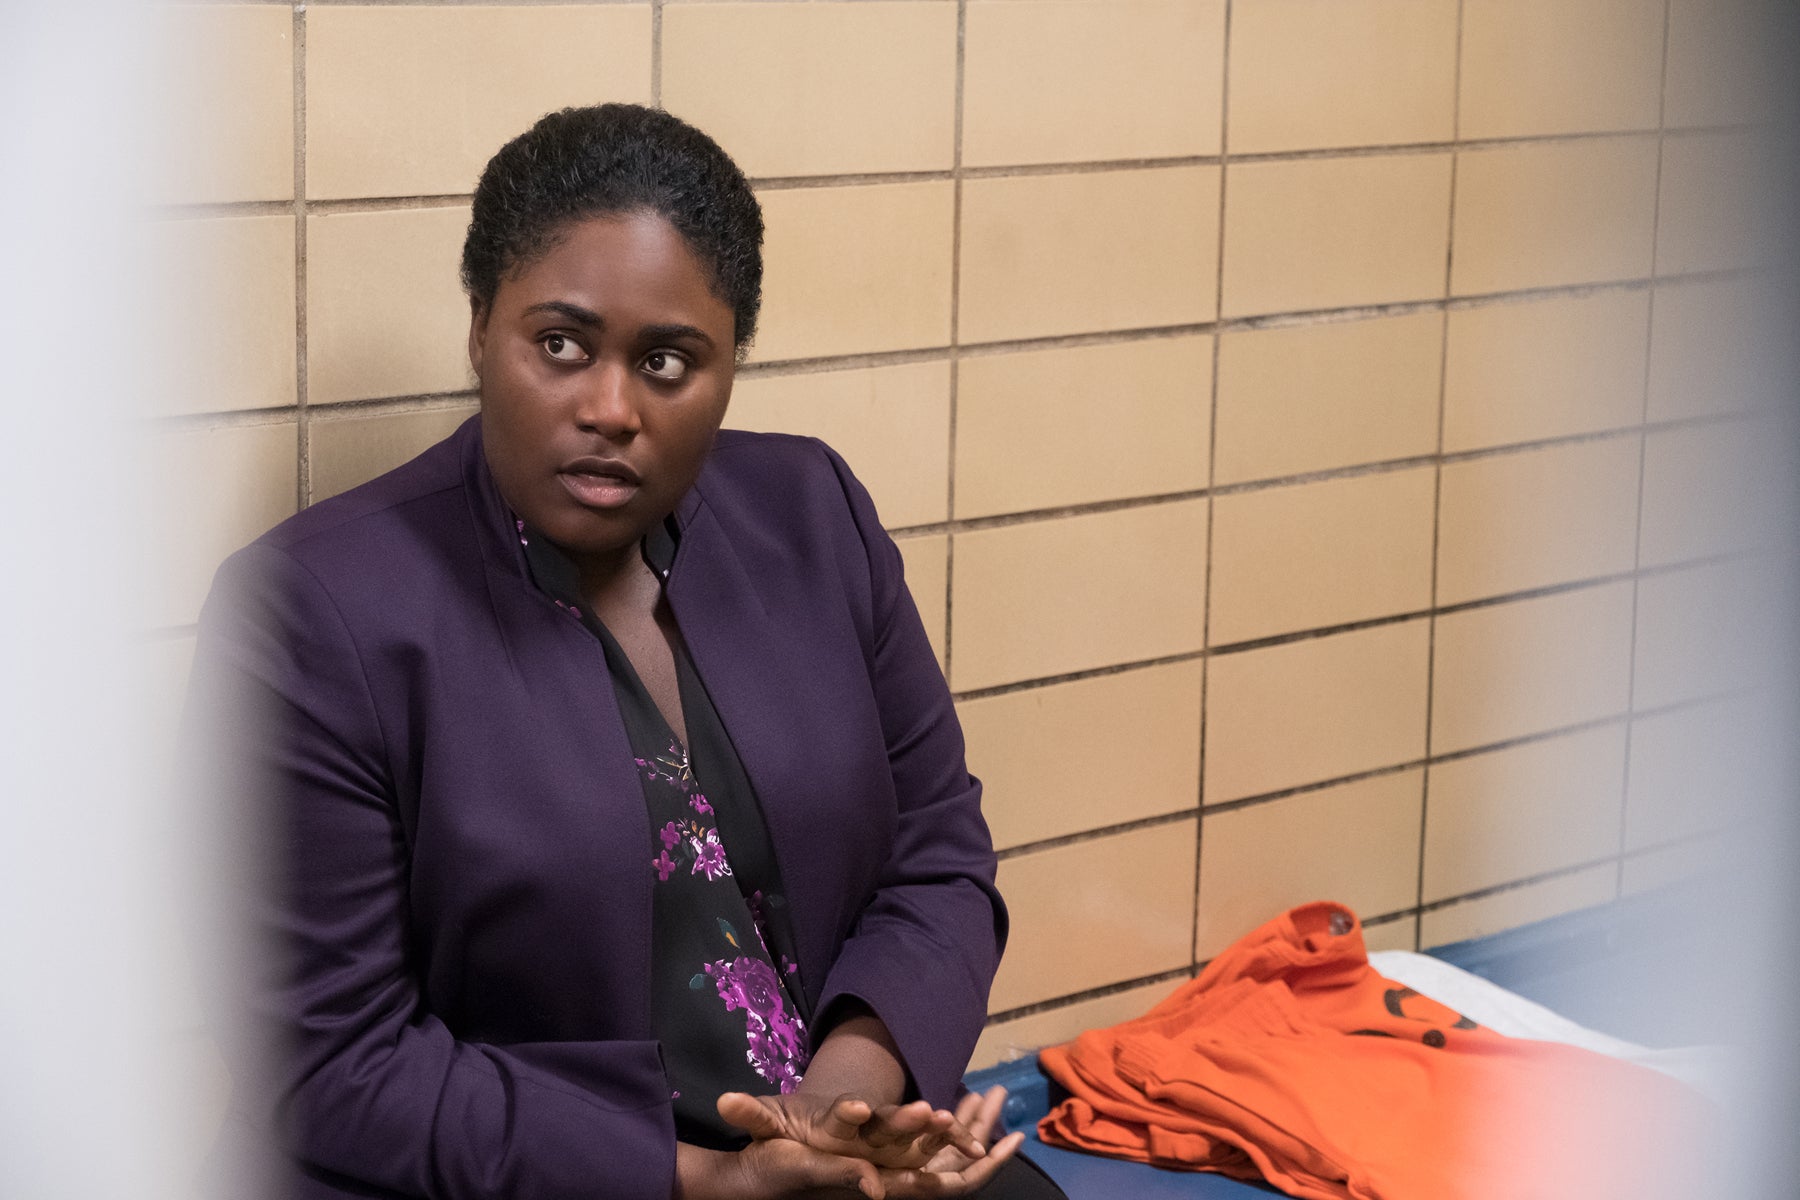 Taystee Jefferson, seen through prison bars, wears a blouse and jacket and speaks to someone off camera in an episode of Orange Is the New Black.